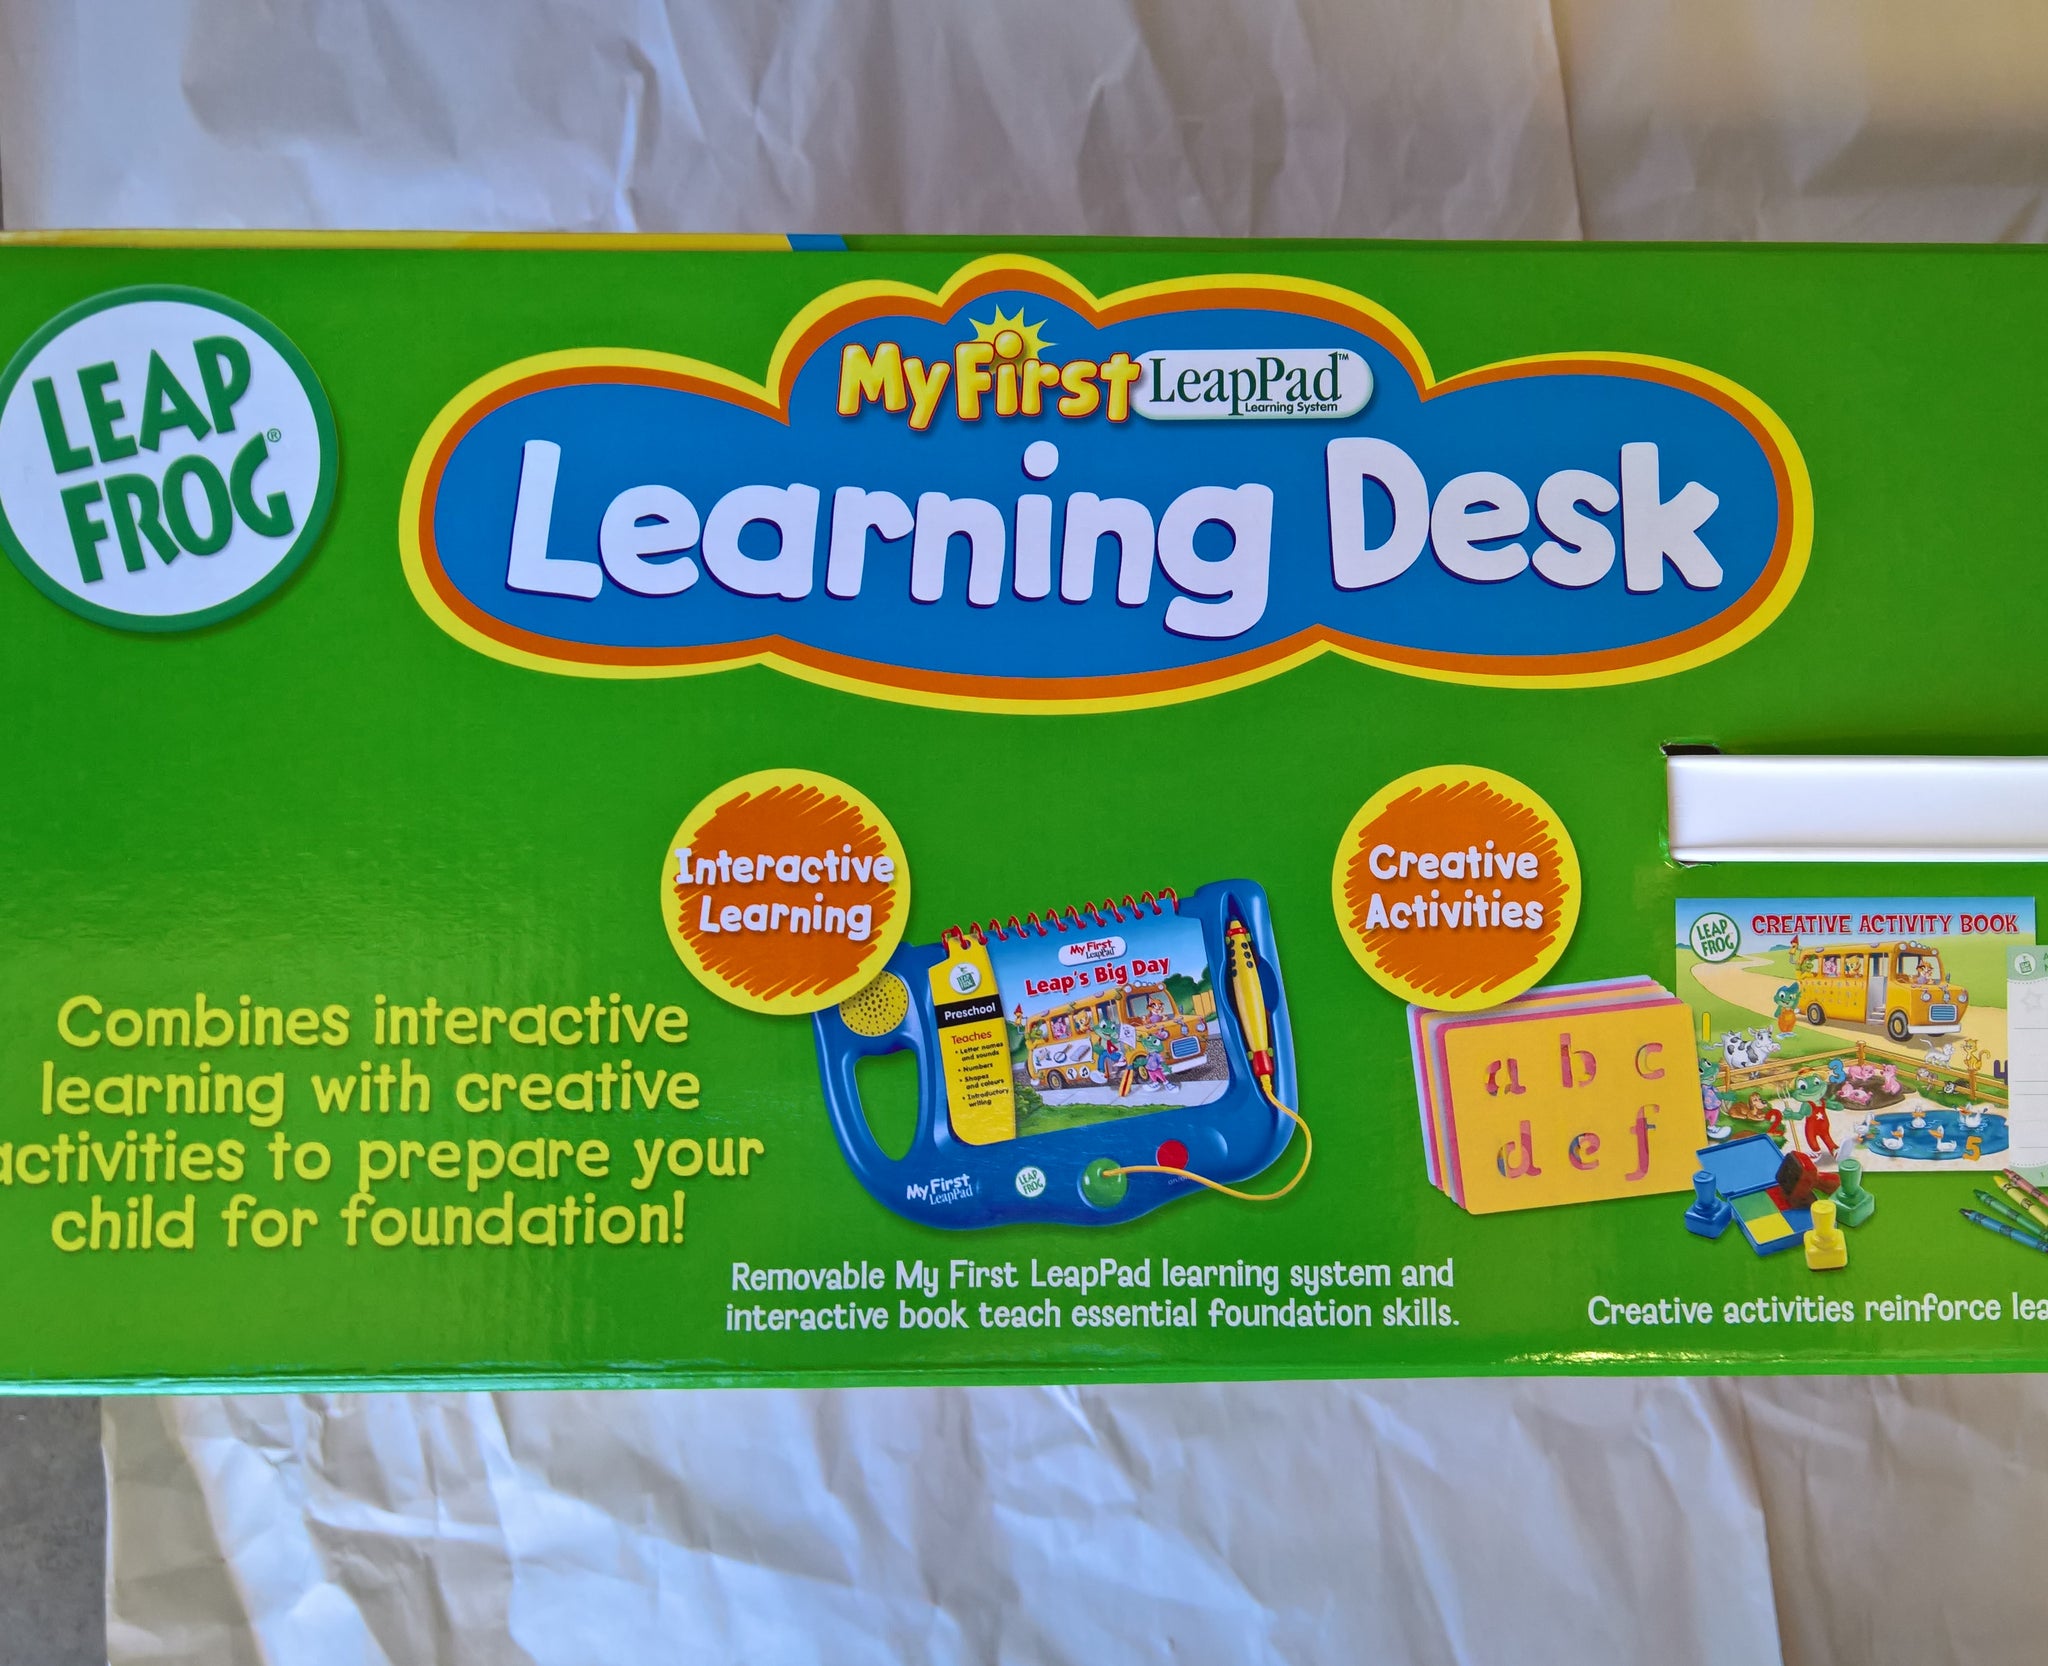 1 Leap Frog My First Leappad Learning Desk Chair Child Furniture